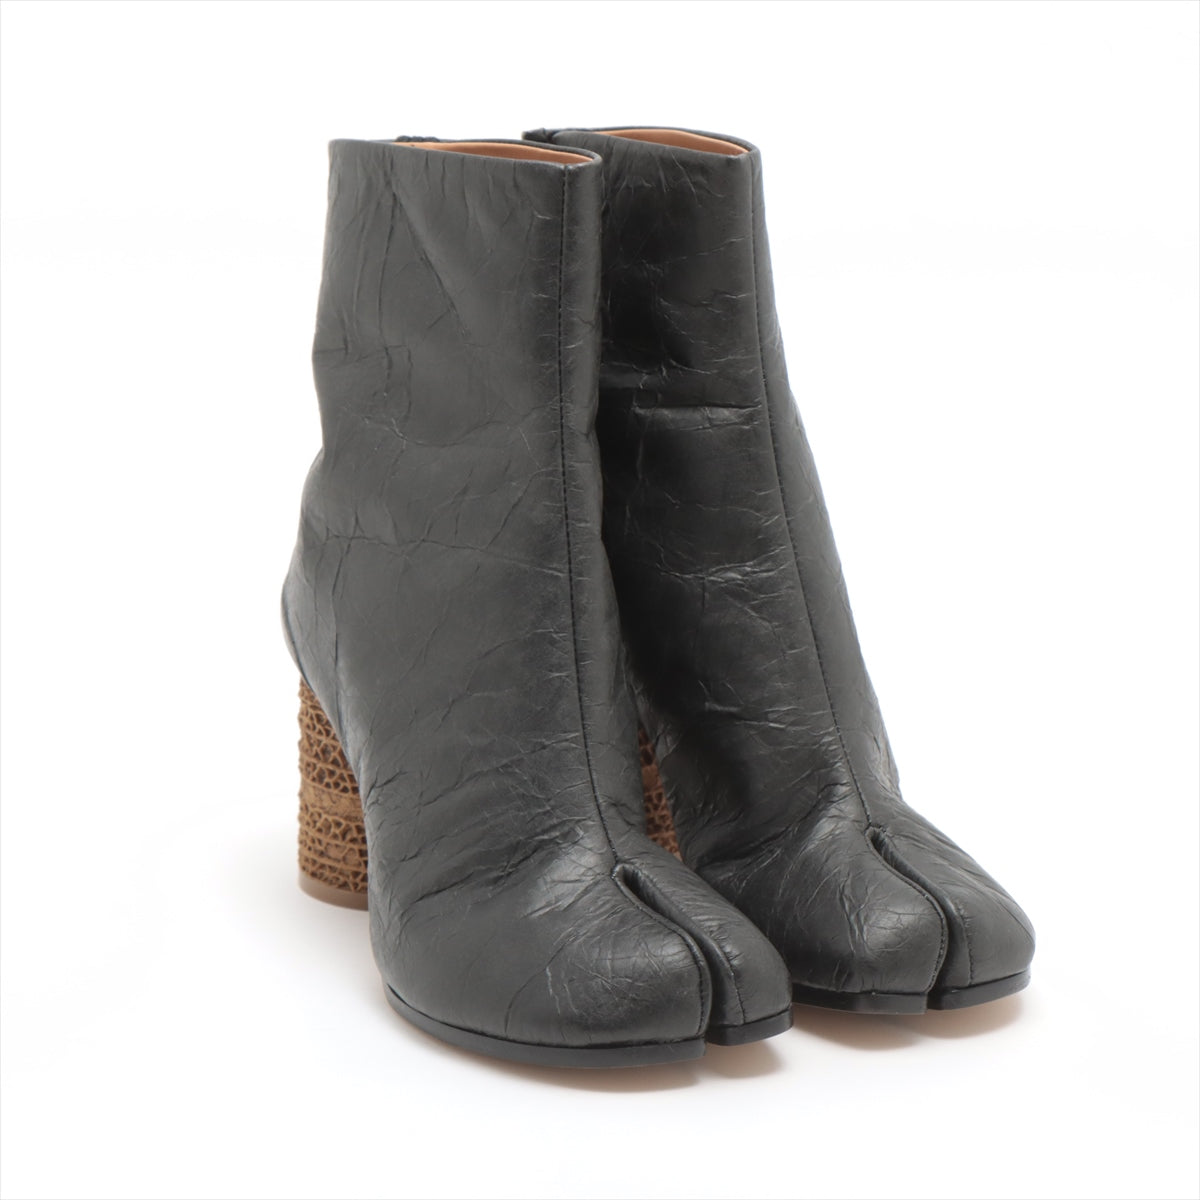 Maison Margiela TABI Leather Short Boots 35 1/2 Ladies' Black S58WU0381 Wrinkle processing 22 box There is a bag